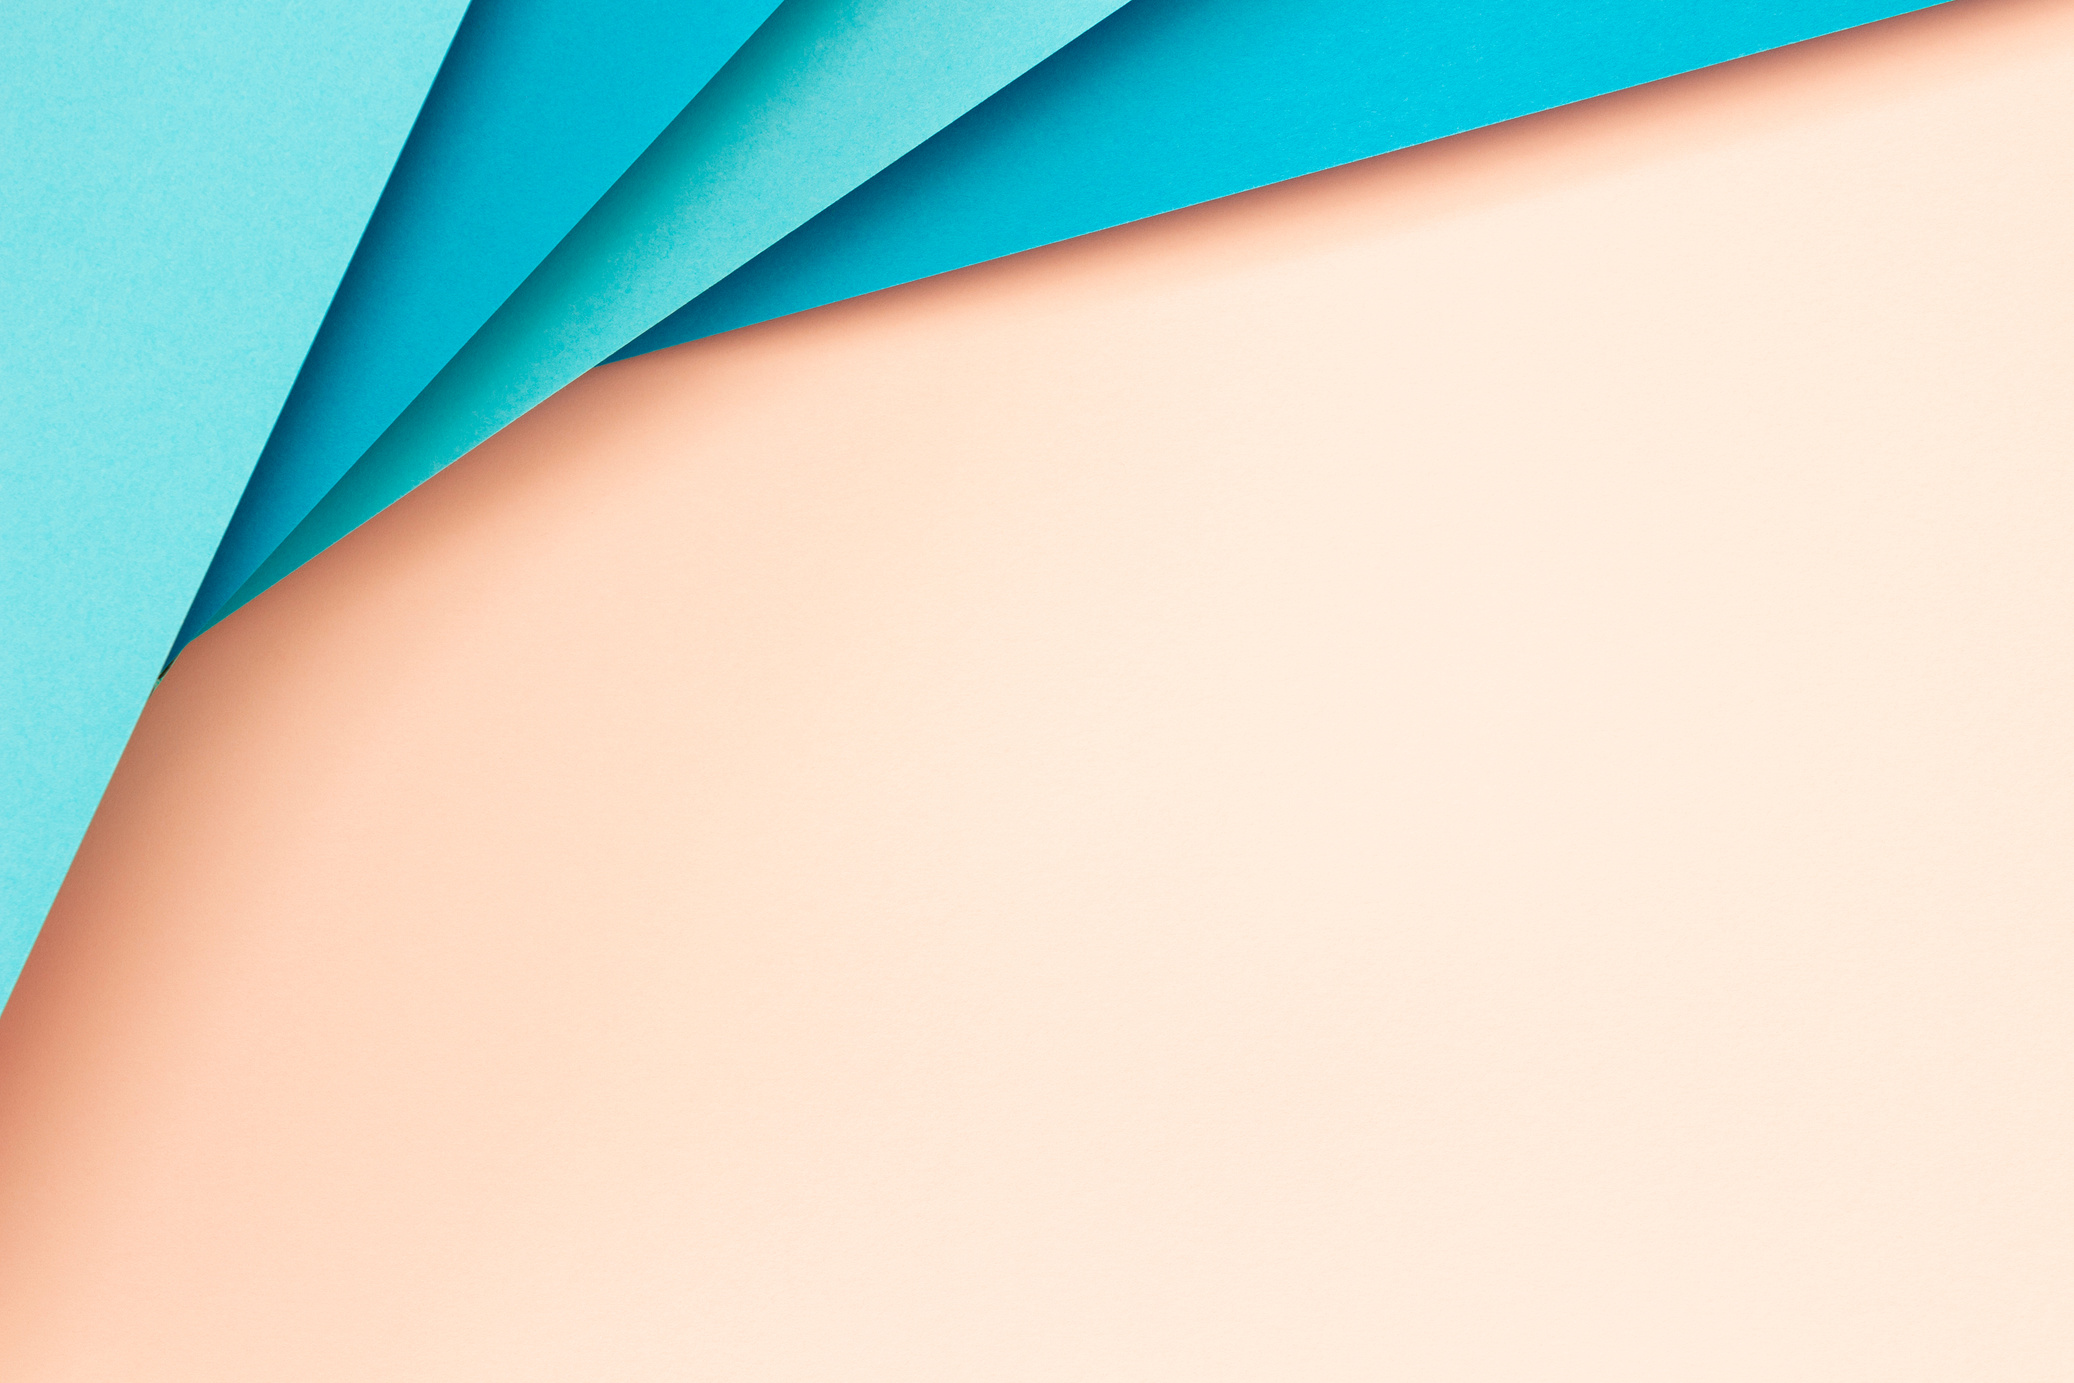 Abstract Color Papers Geometry Flat Lay Composition Background with Blue and Light Pink Color Lines and Shapes. Top View